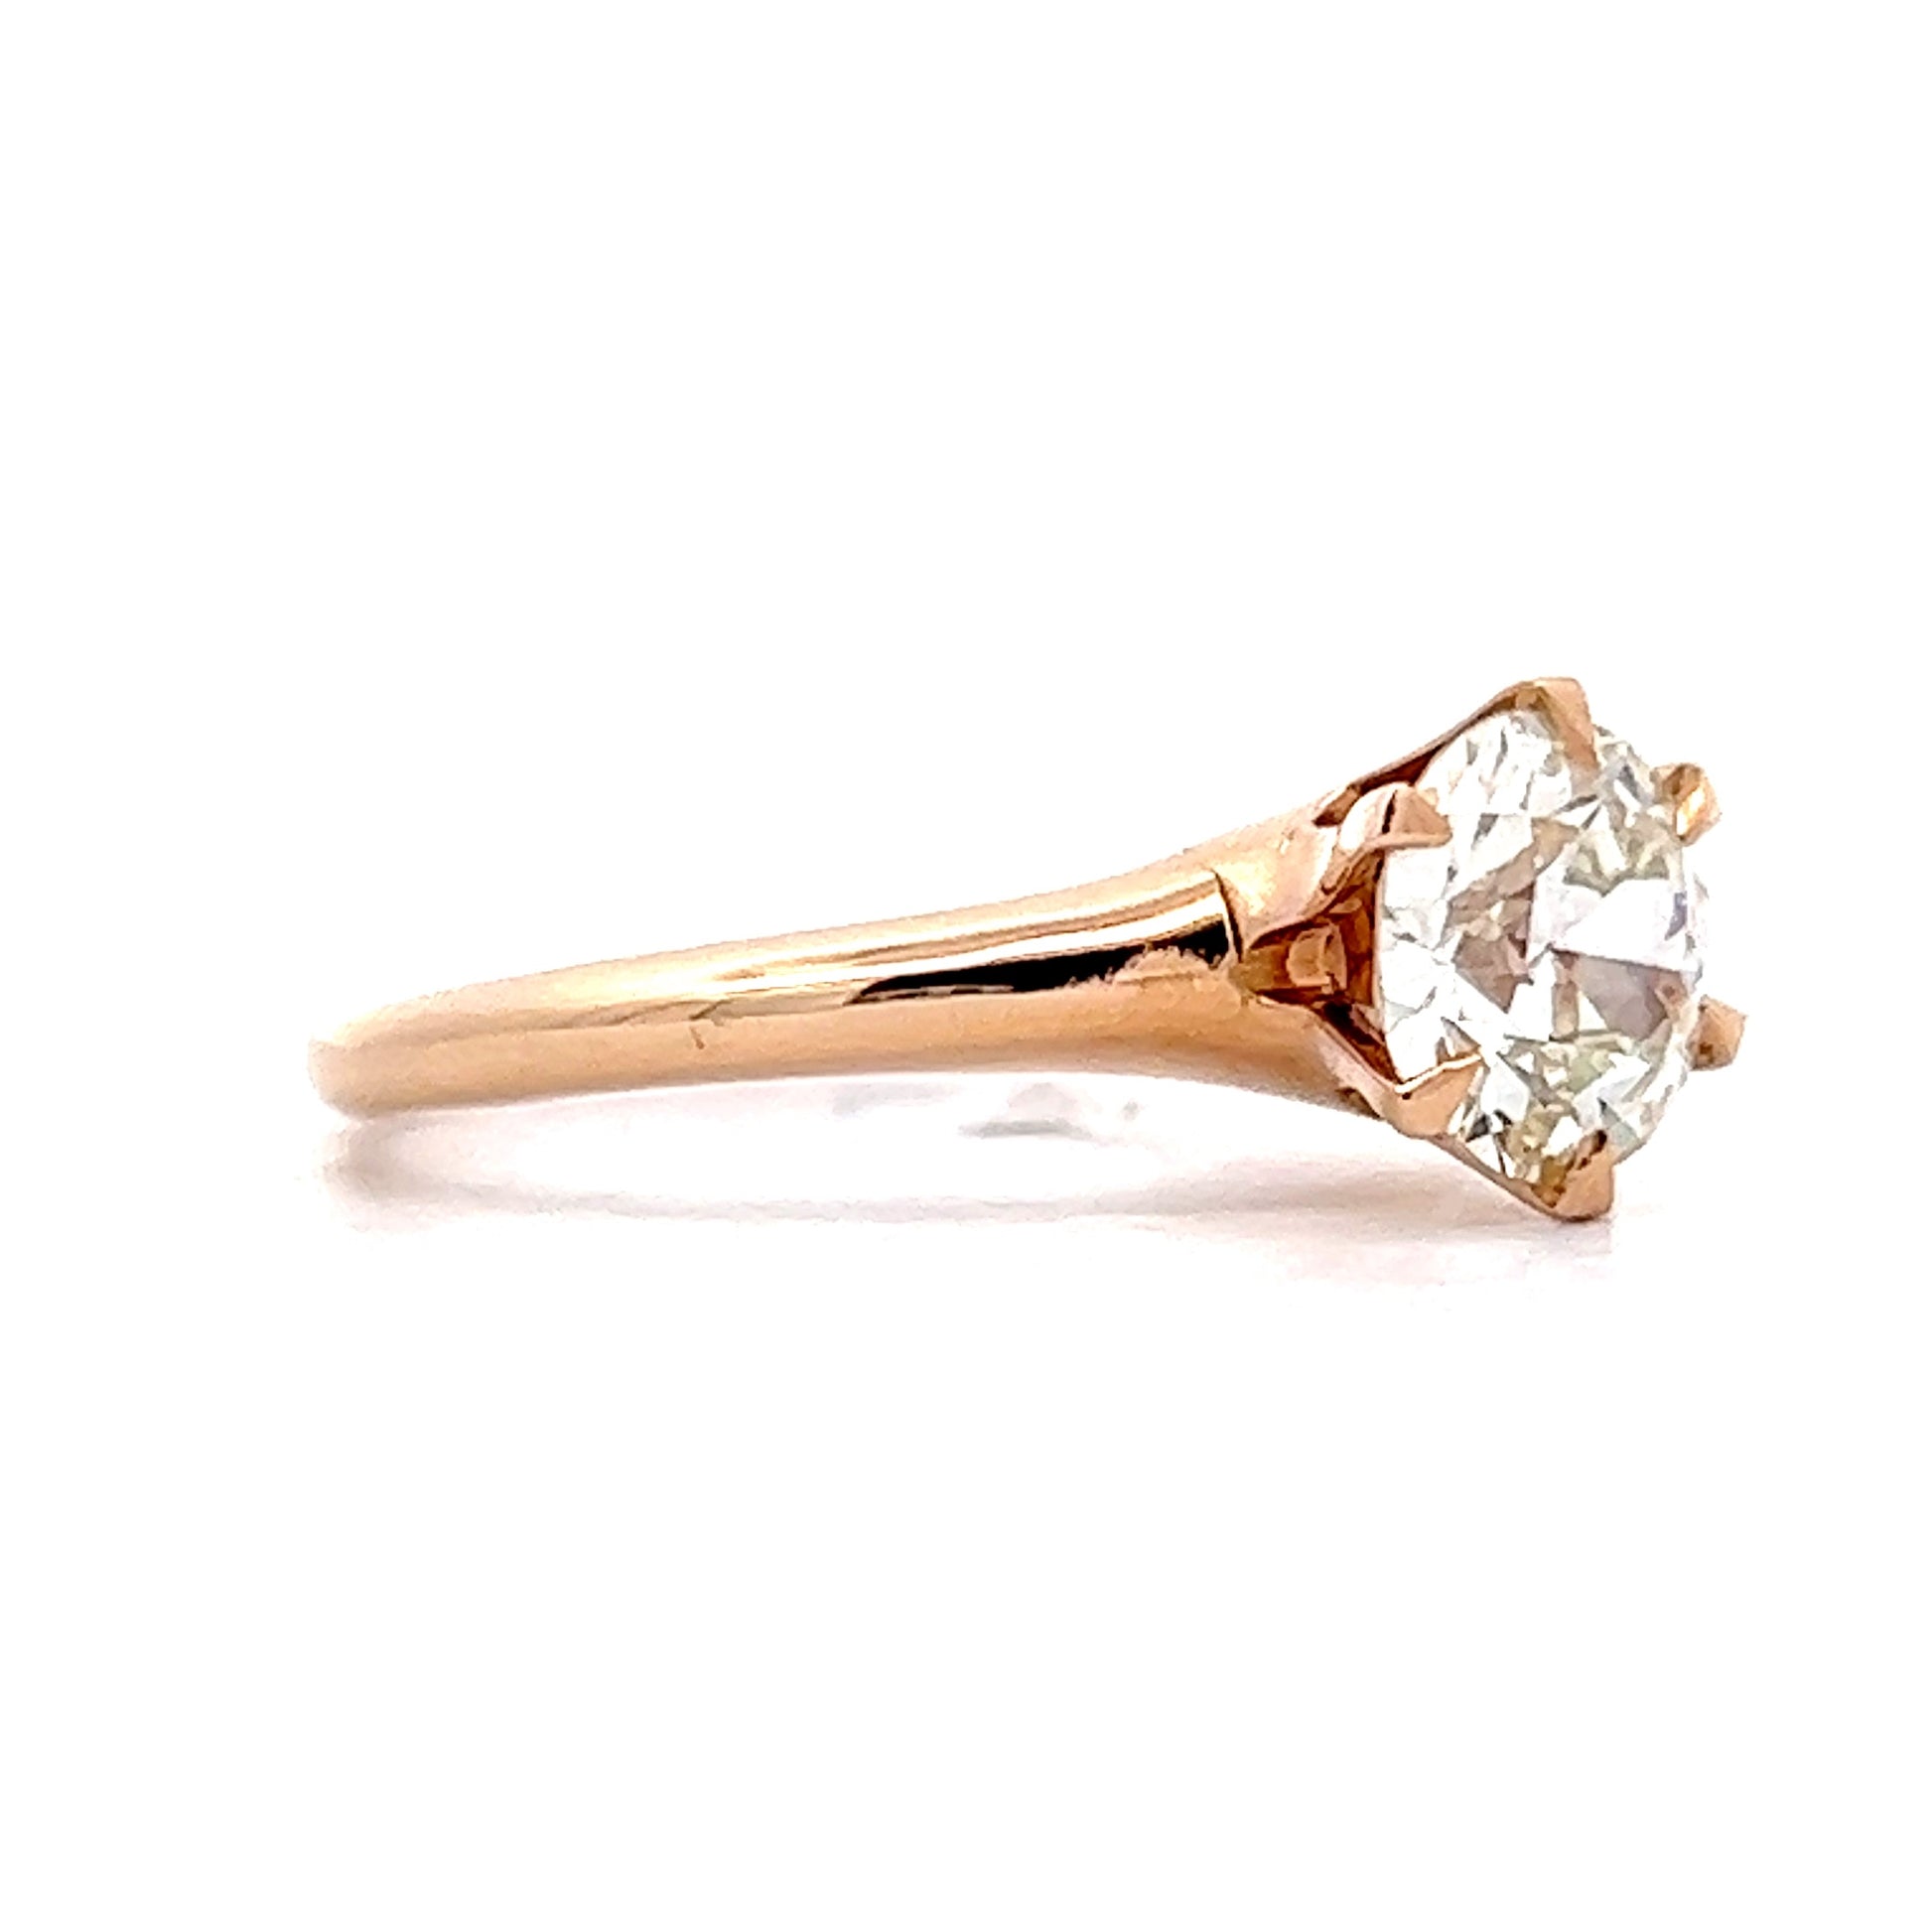 Victorian Solitaire Diamond Engagement Ring in 14k Rose Gold